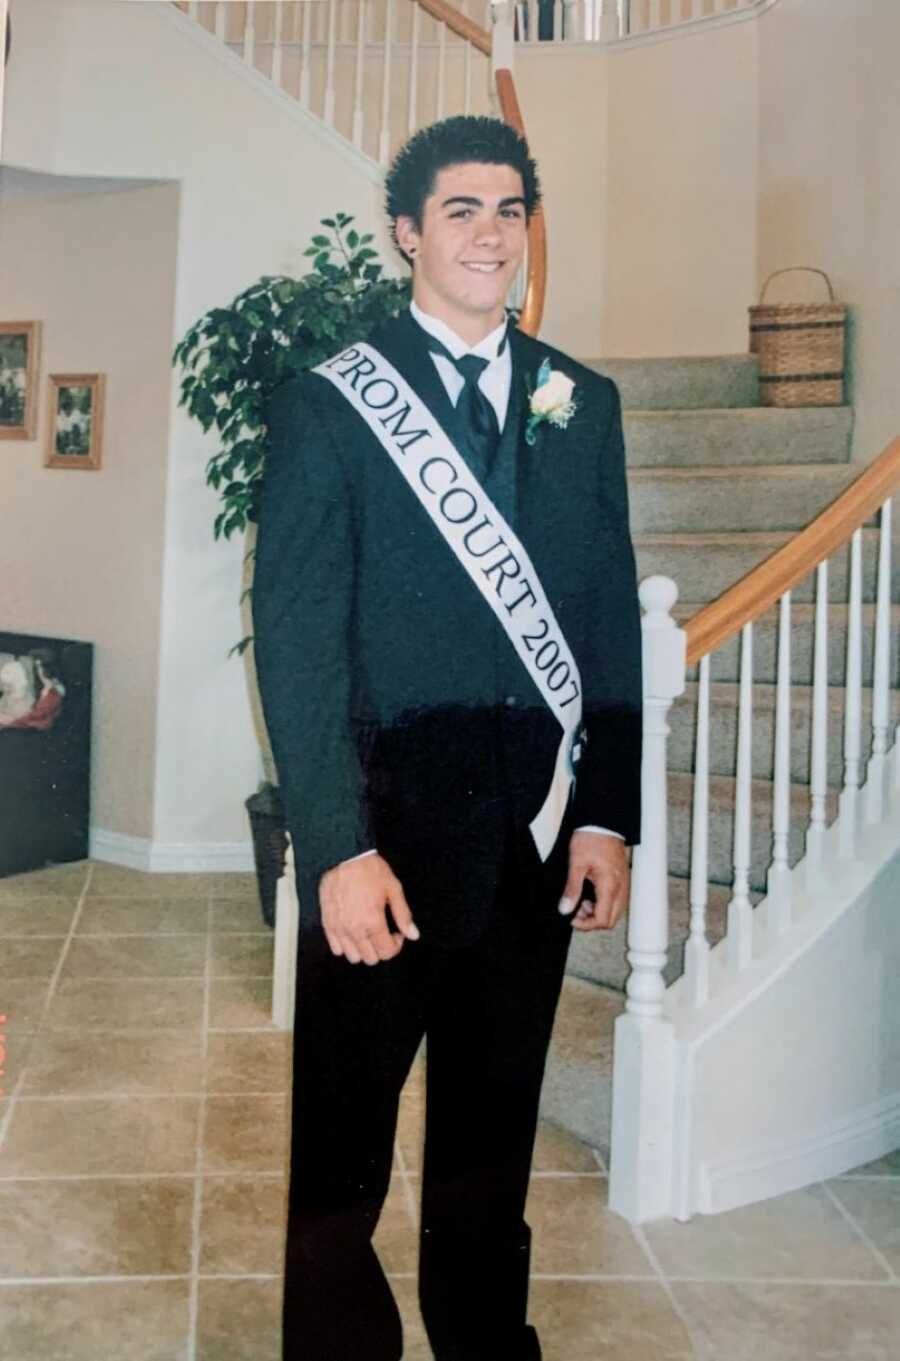 High school student smiles for a photo in a suit while wearing a sash that says "Prom court 2007"